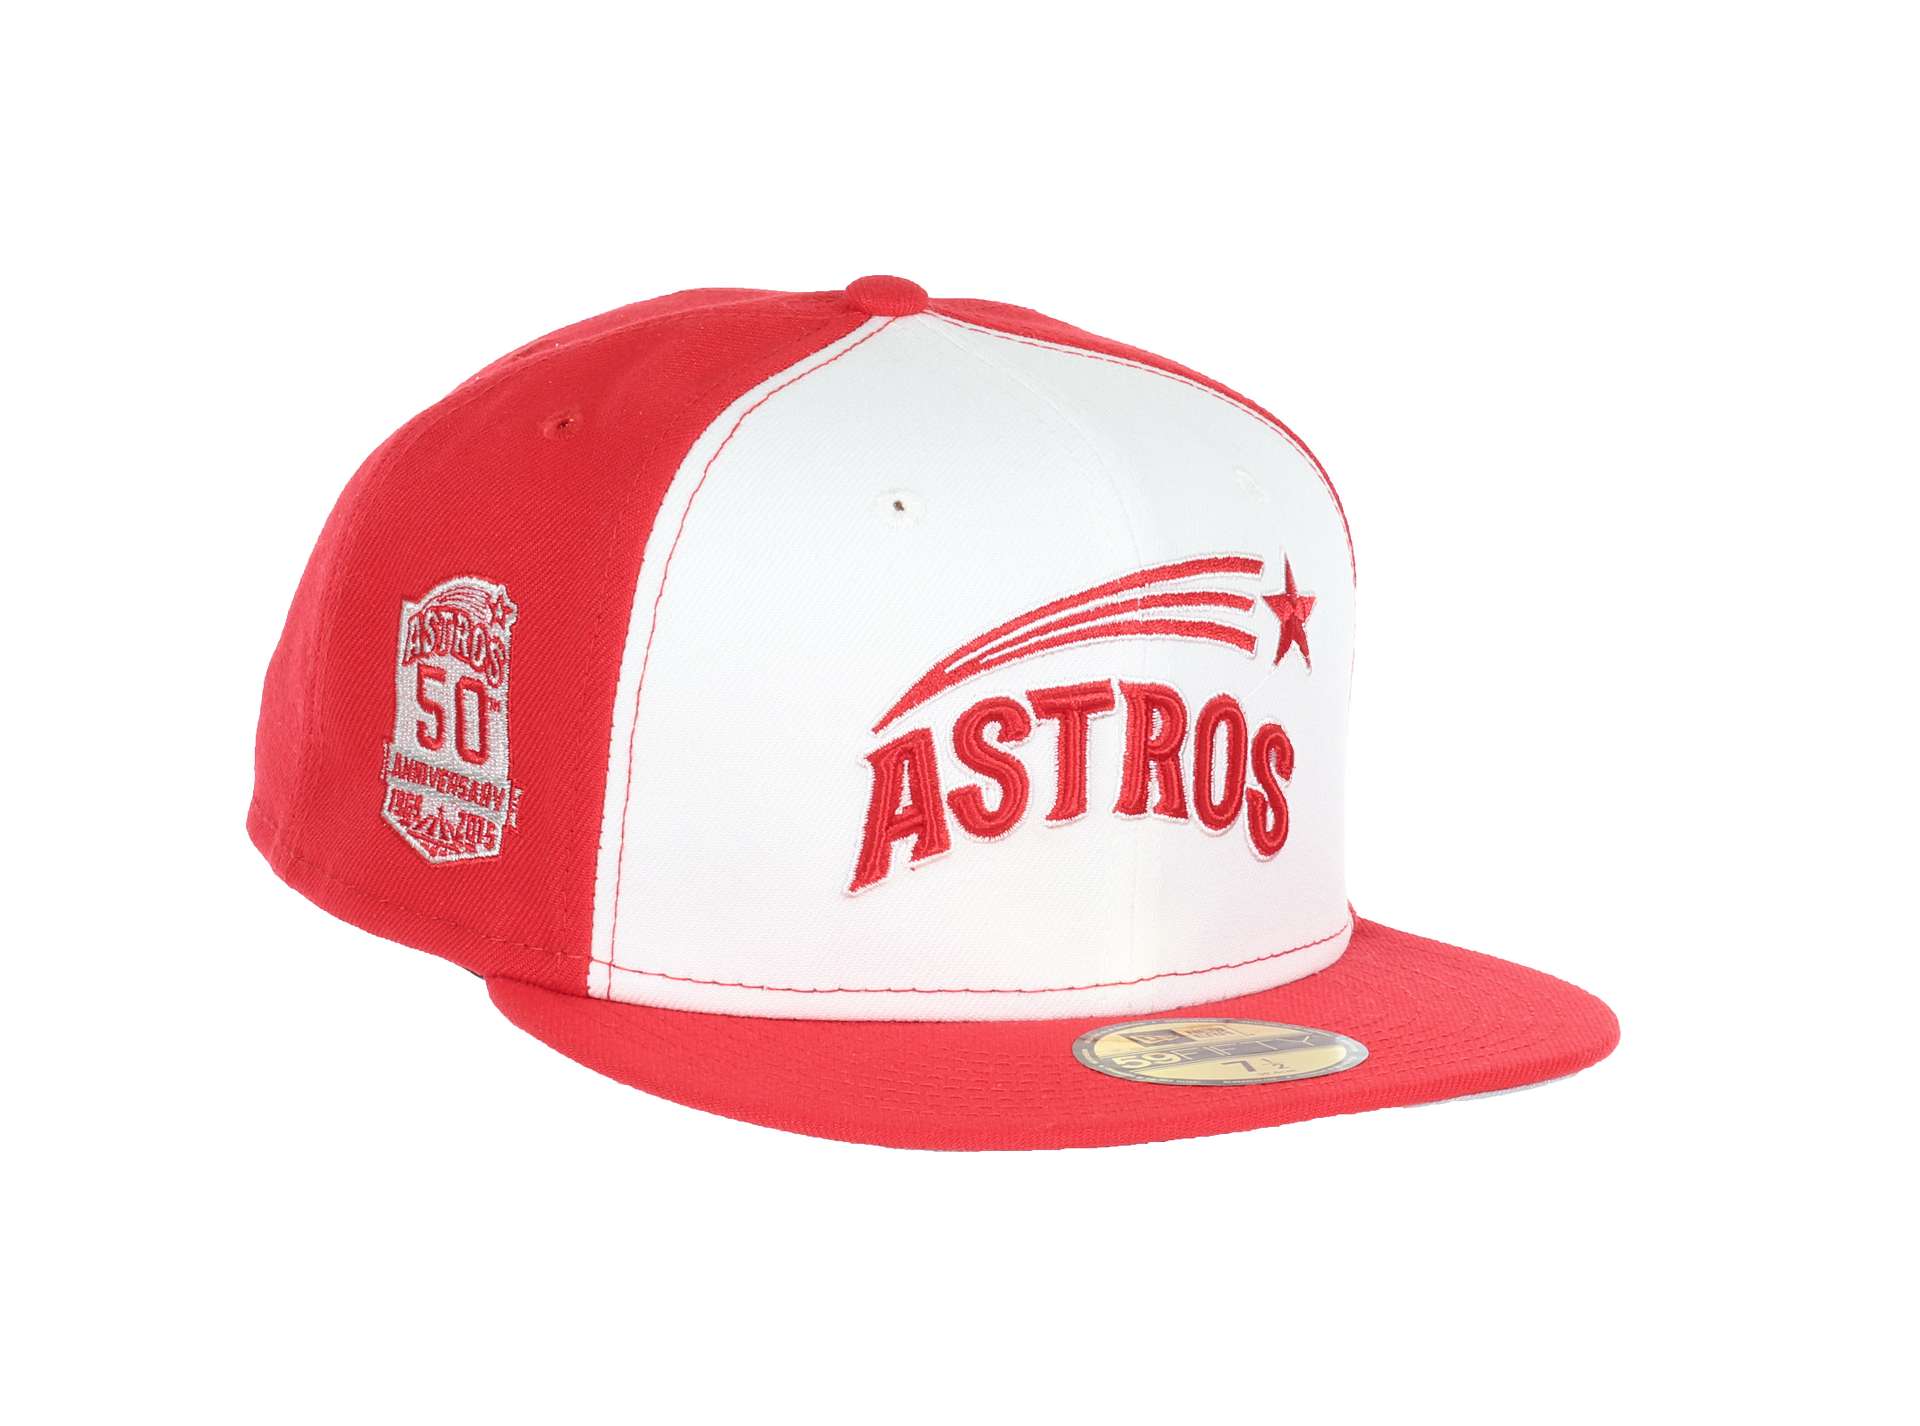 Houston Astros MLB Cooperstown 50th Anniversary Sidepatch Red White 59Fifty Basecap New Era